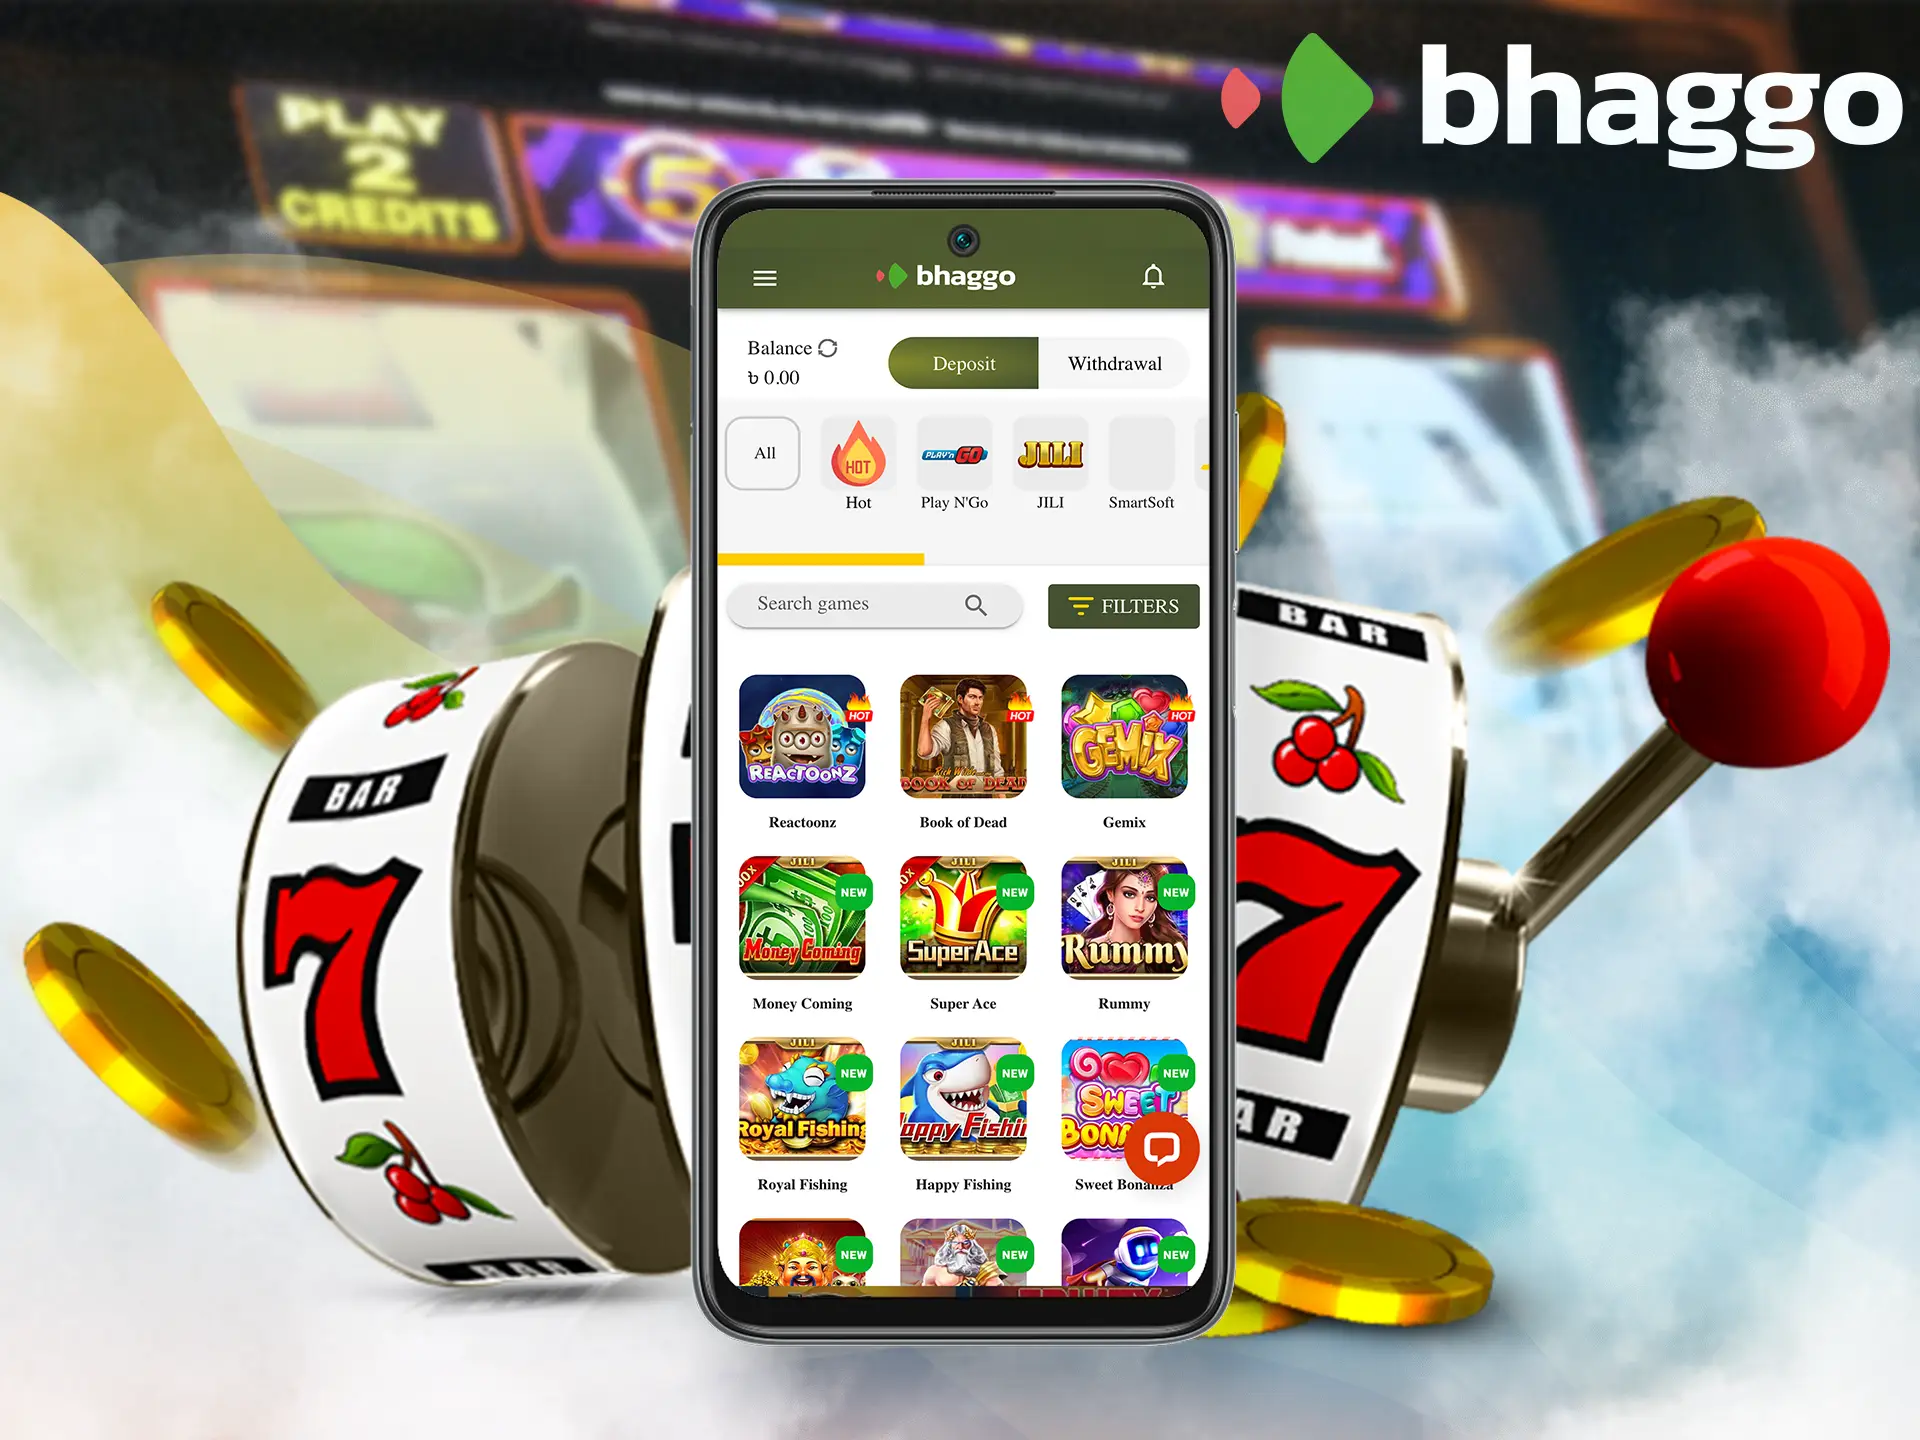 This type of casino Bhaggo will help beginners quickly get the hang of as well as surprise advanced, there are only quality suppliers of games.